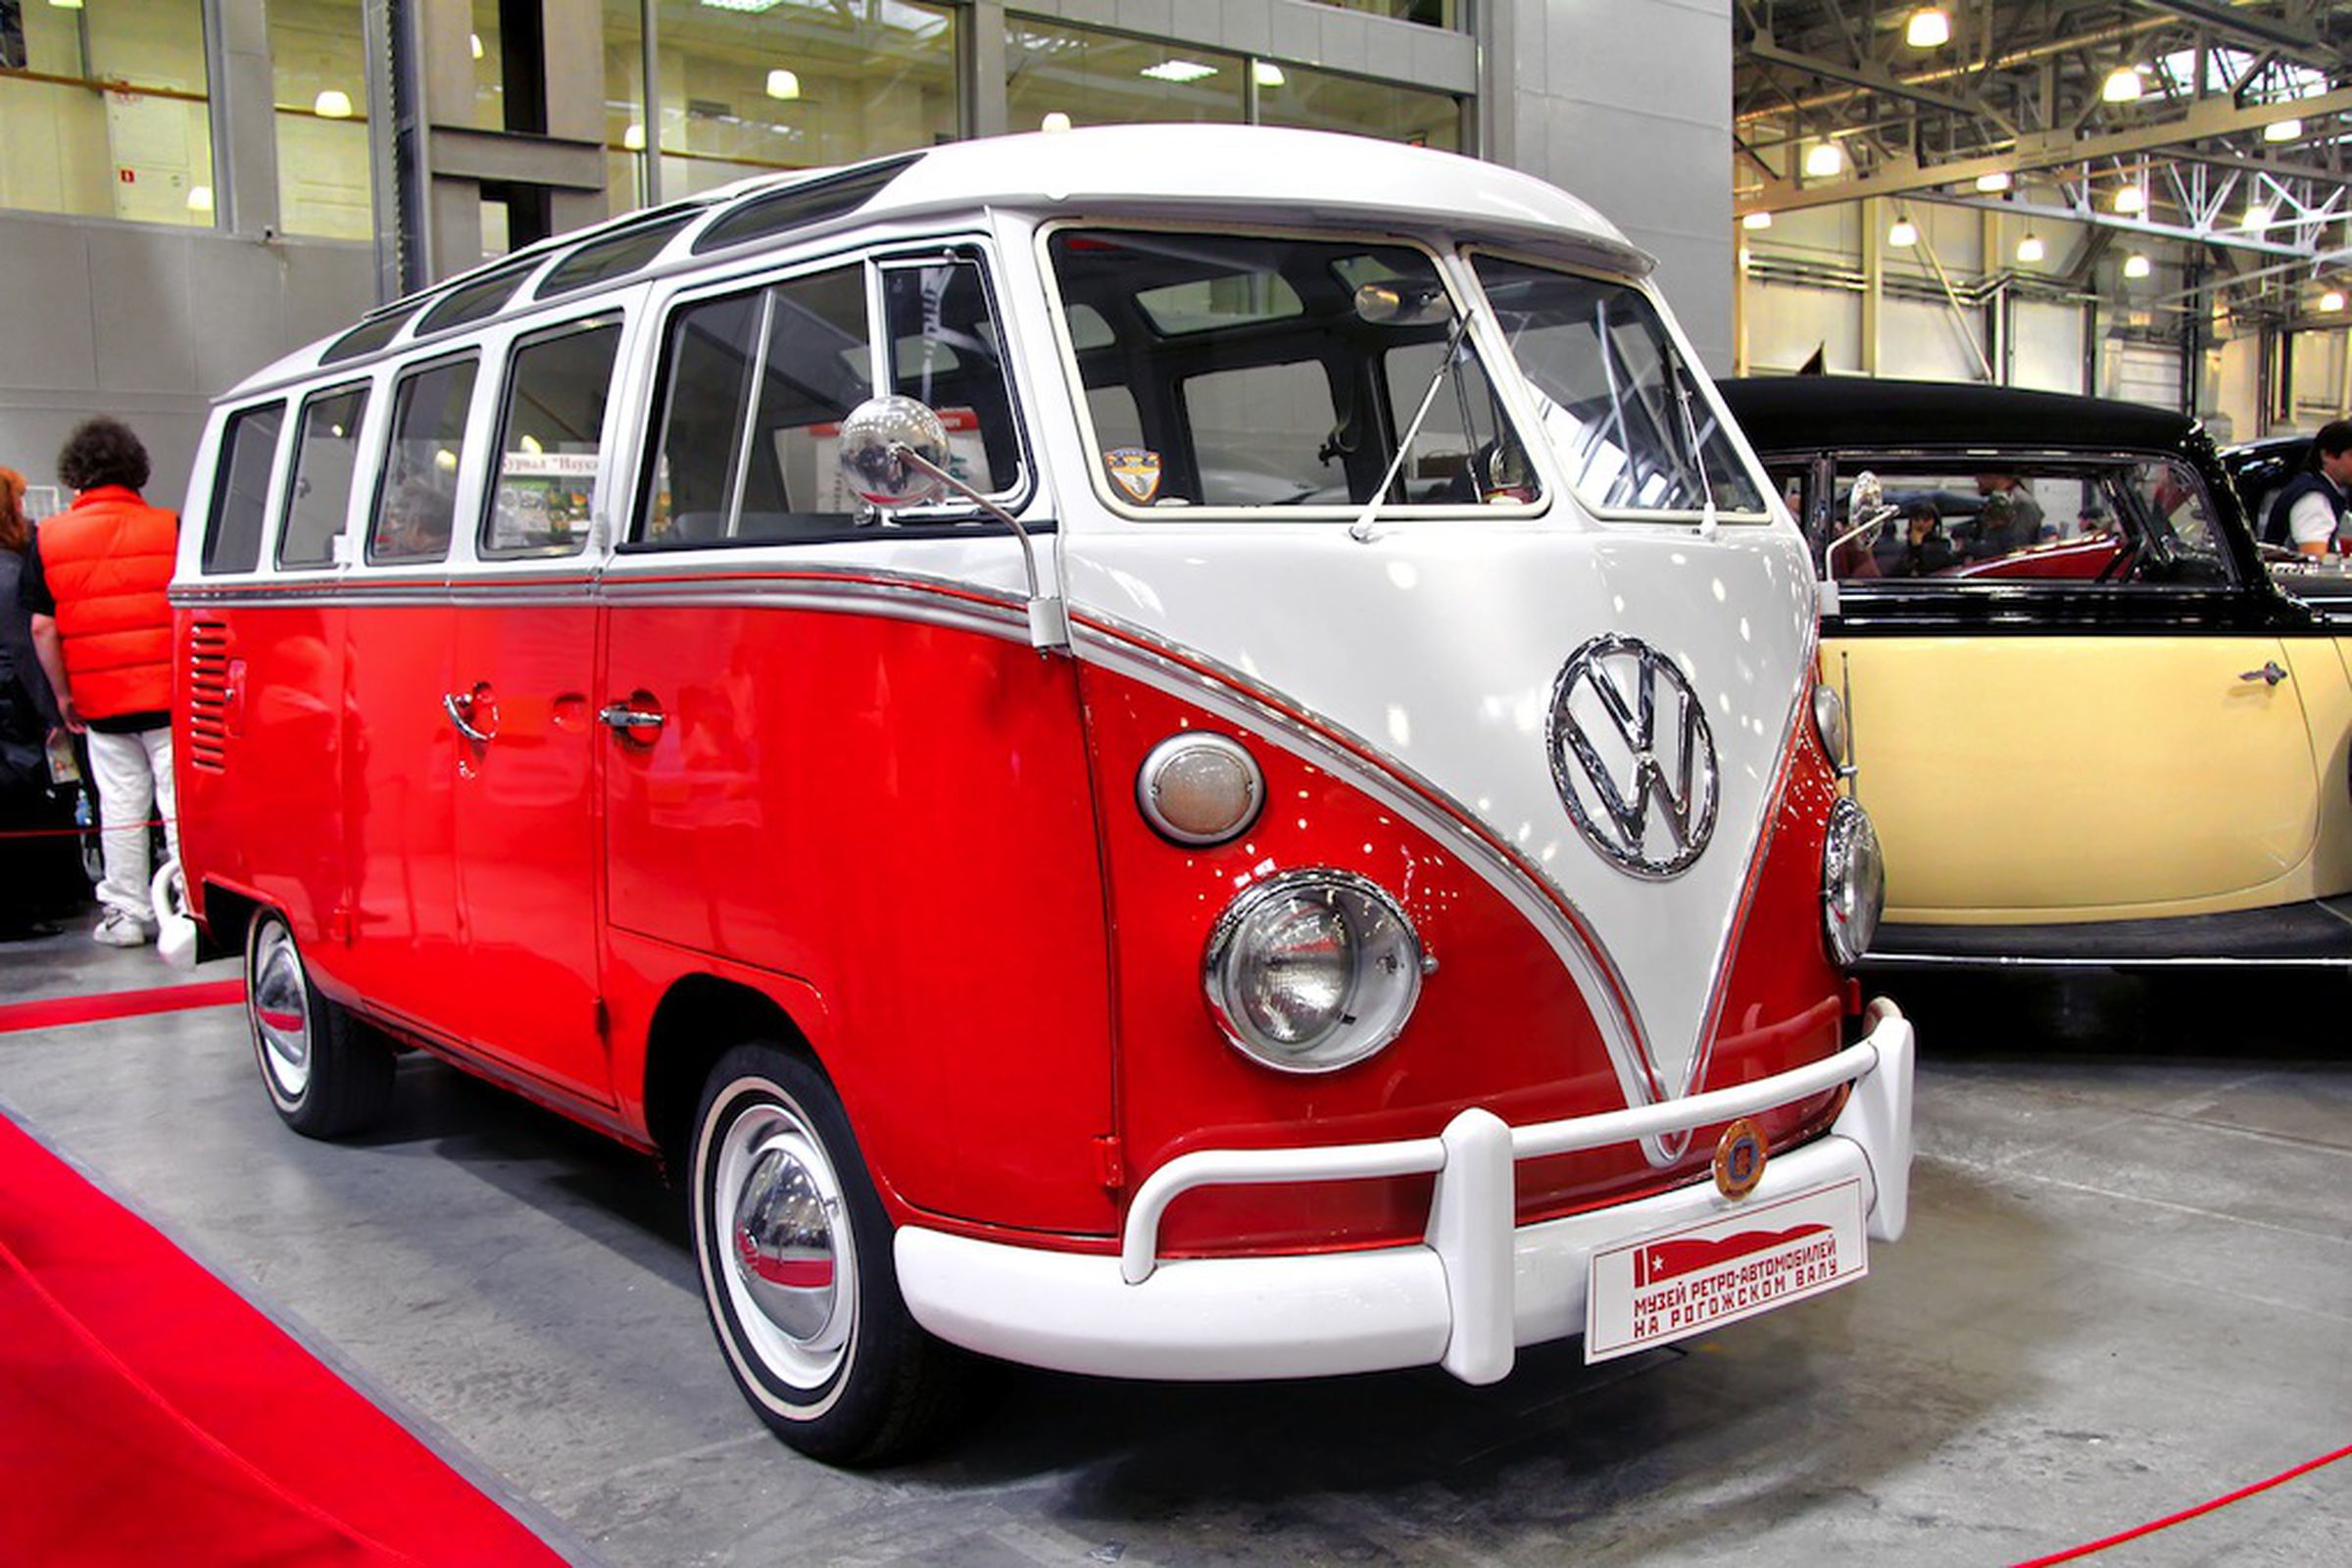 Volkswagen to end production of iconic hippie bus this year - The